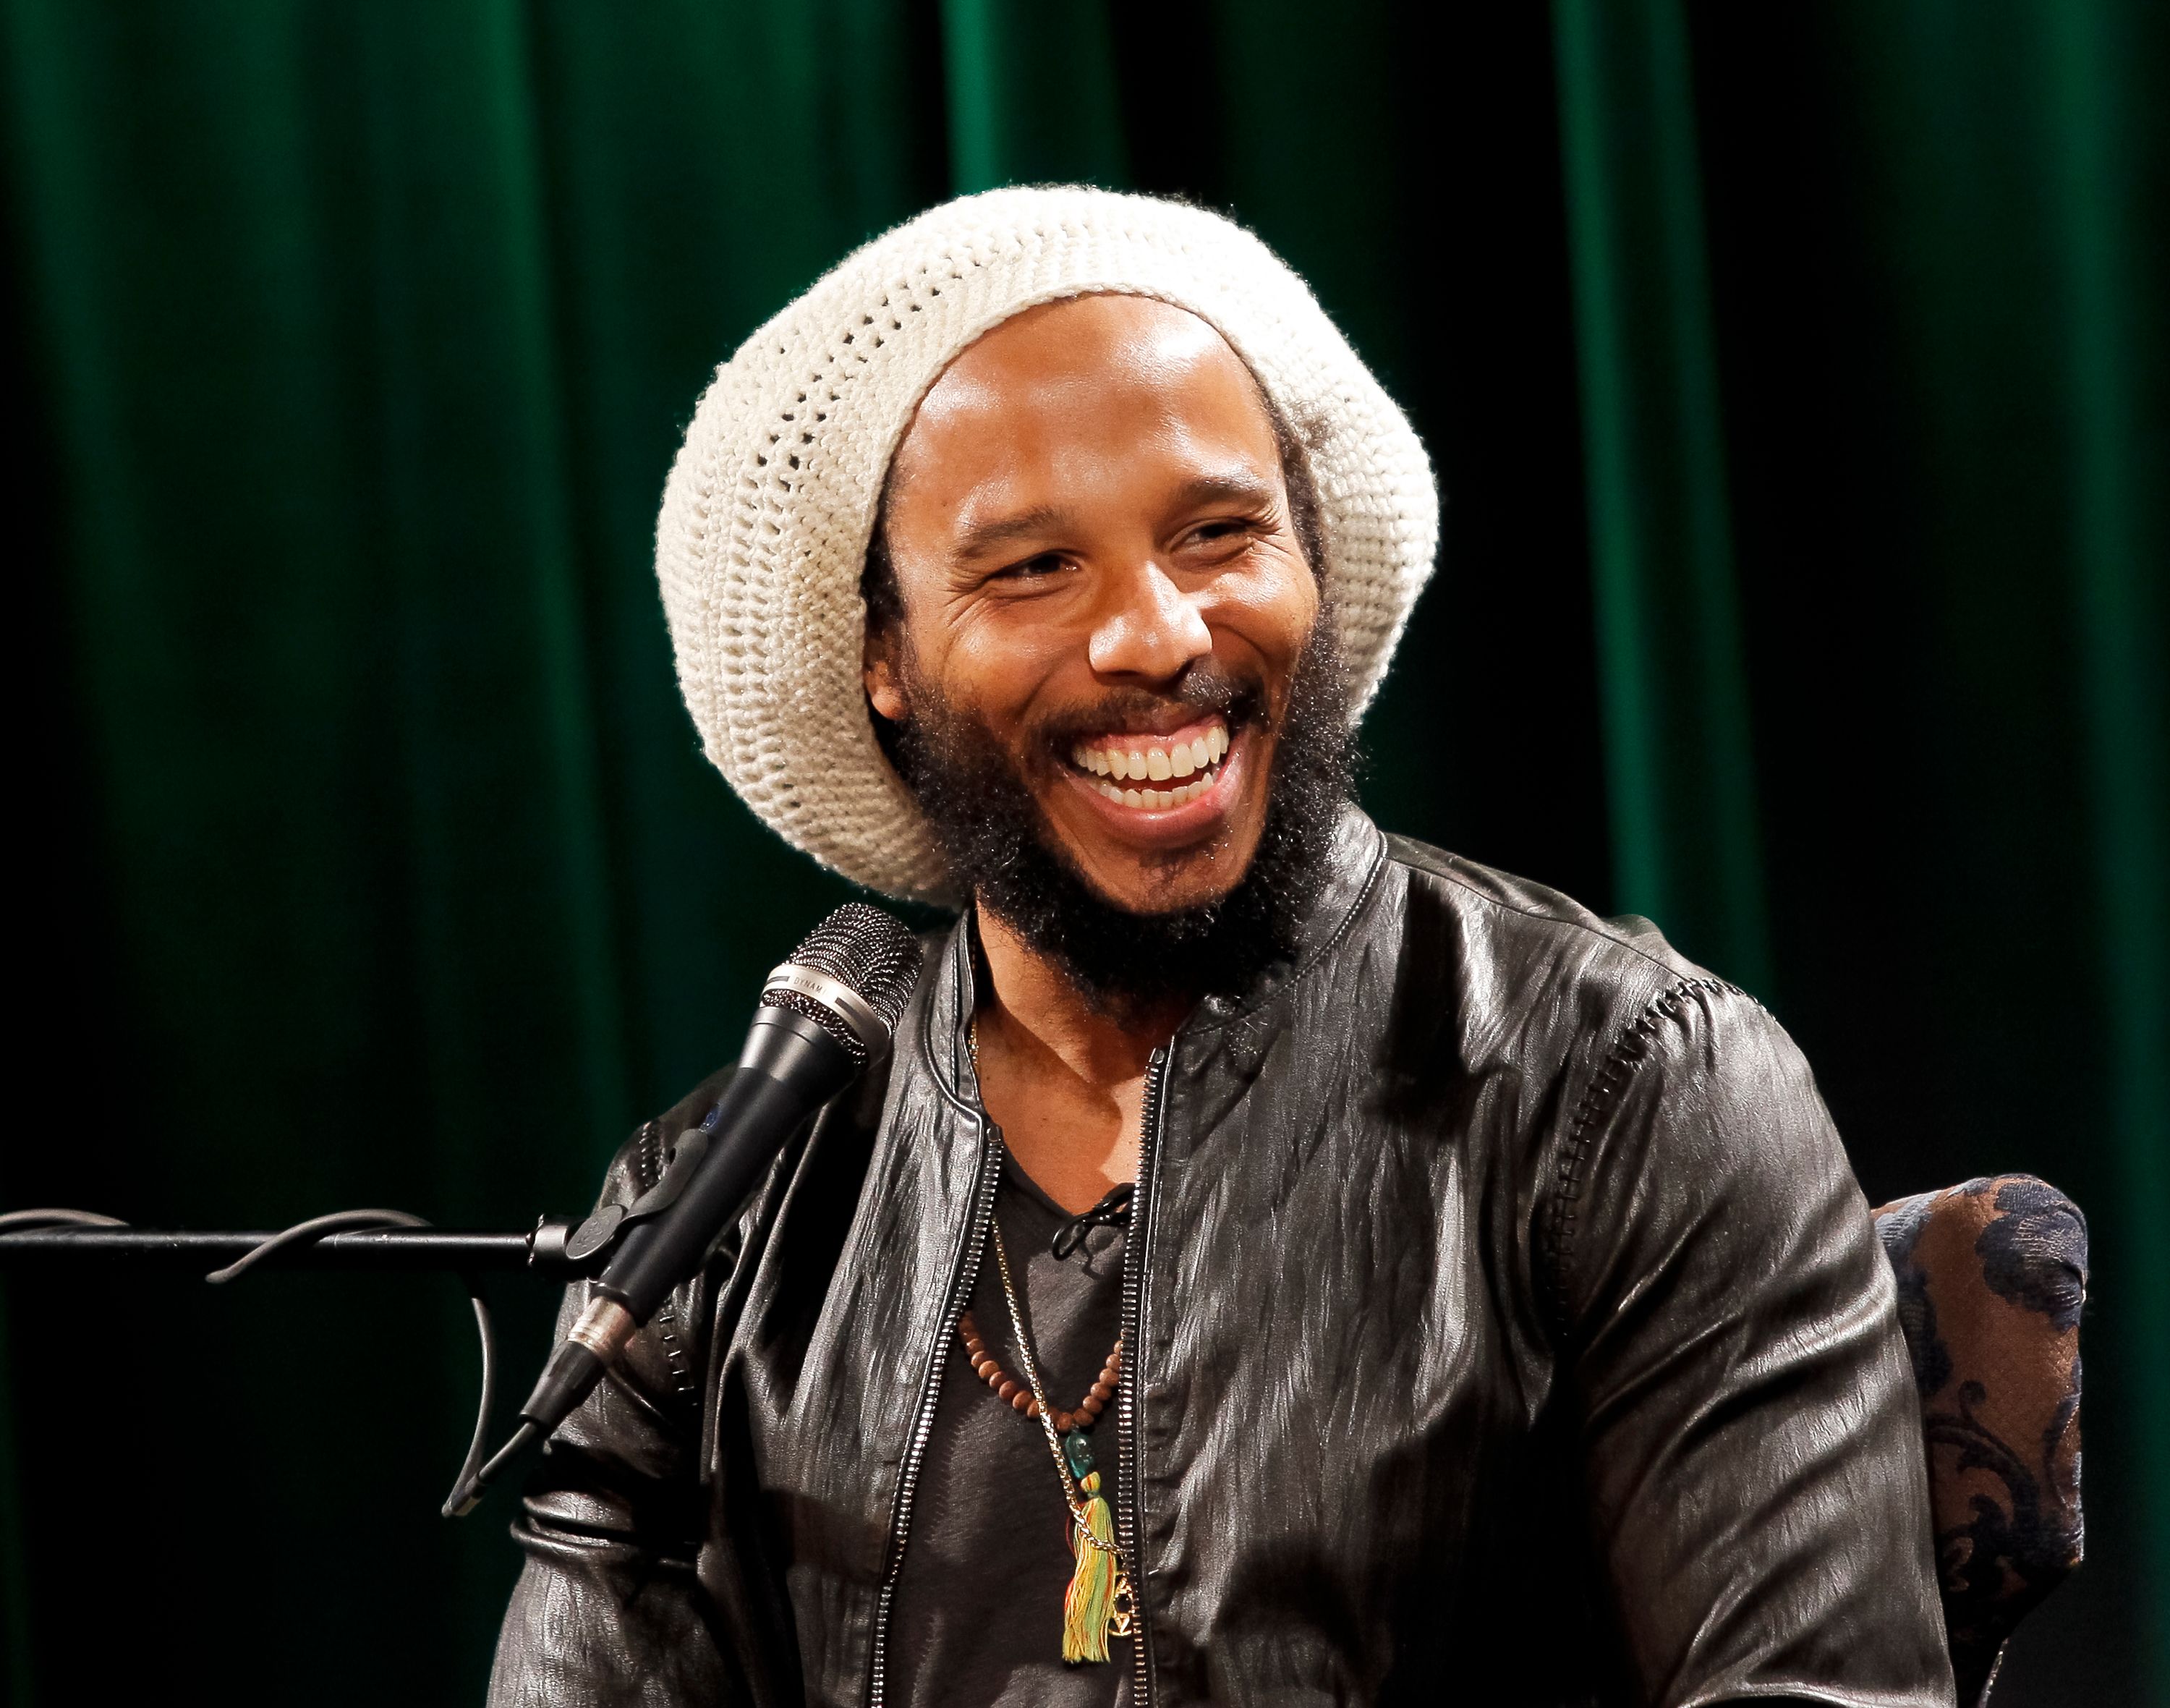 Ziggy Marley attends the screening for the film "Bob Marley & The Wailers: Easy Skanking in Boston '78" on February 18, 2015. | Photo: Getty Images